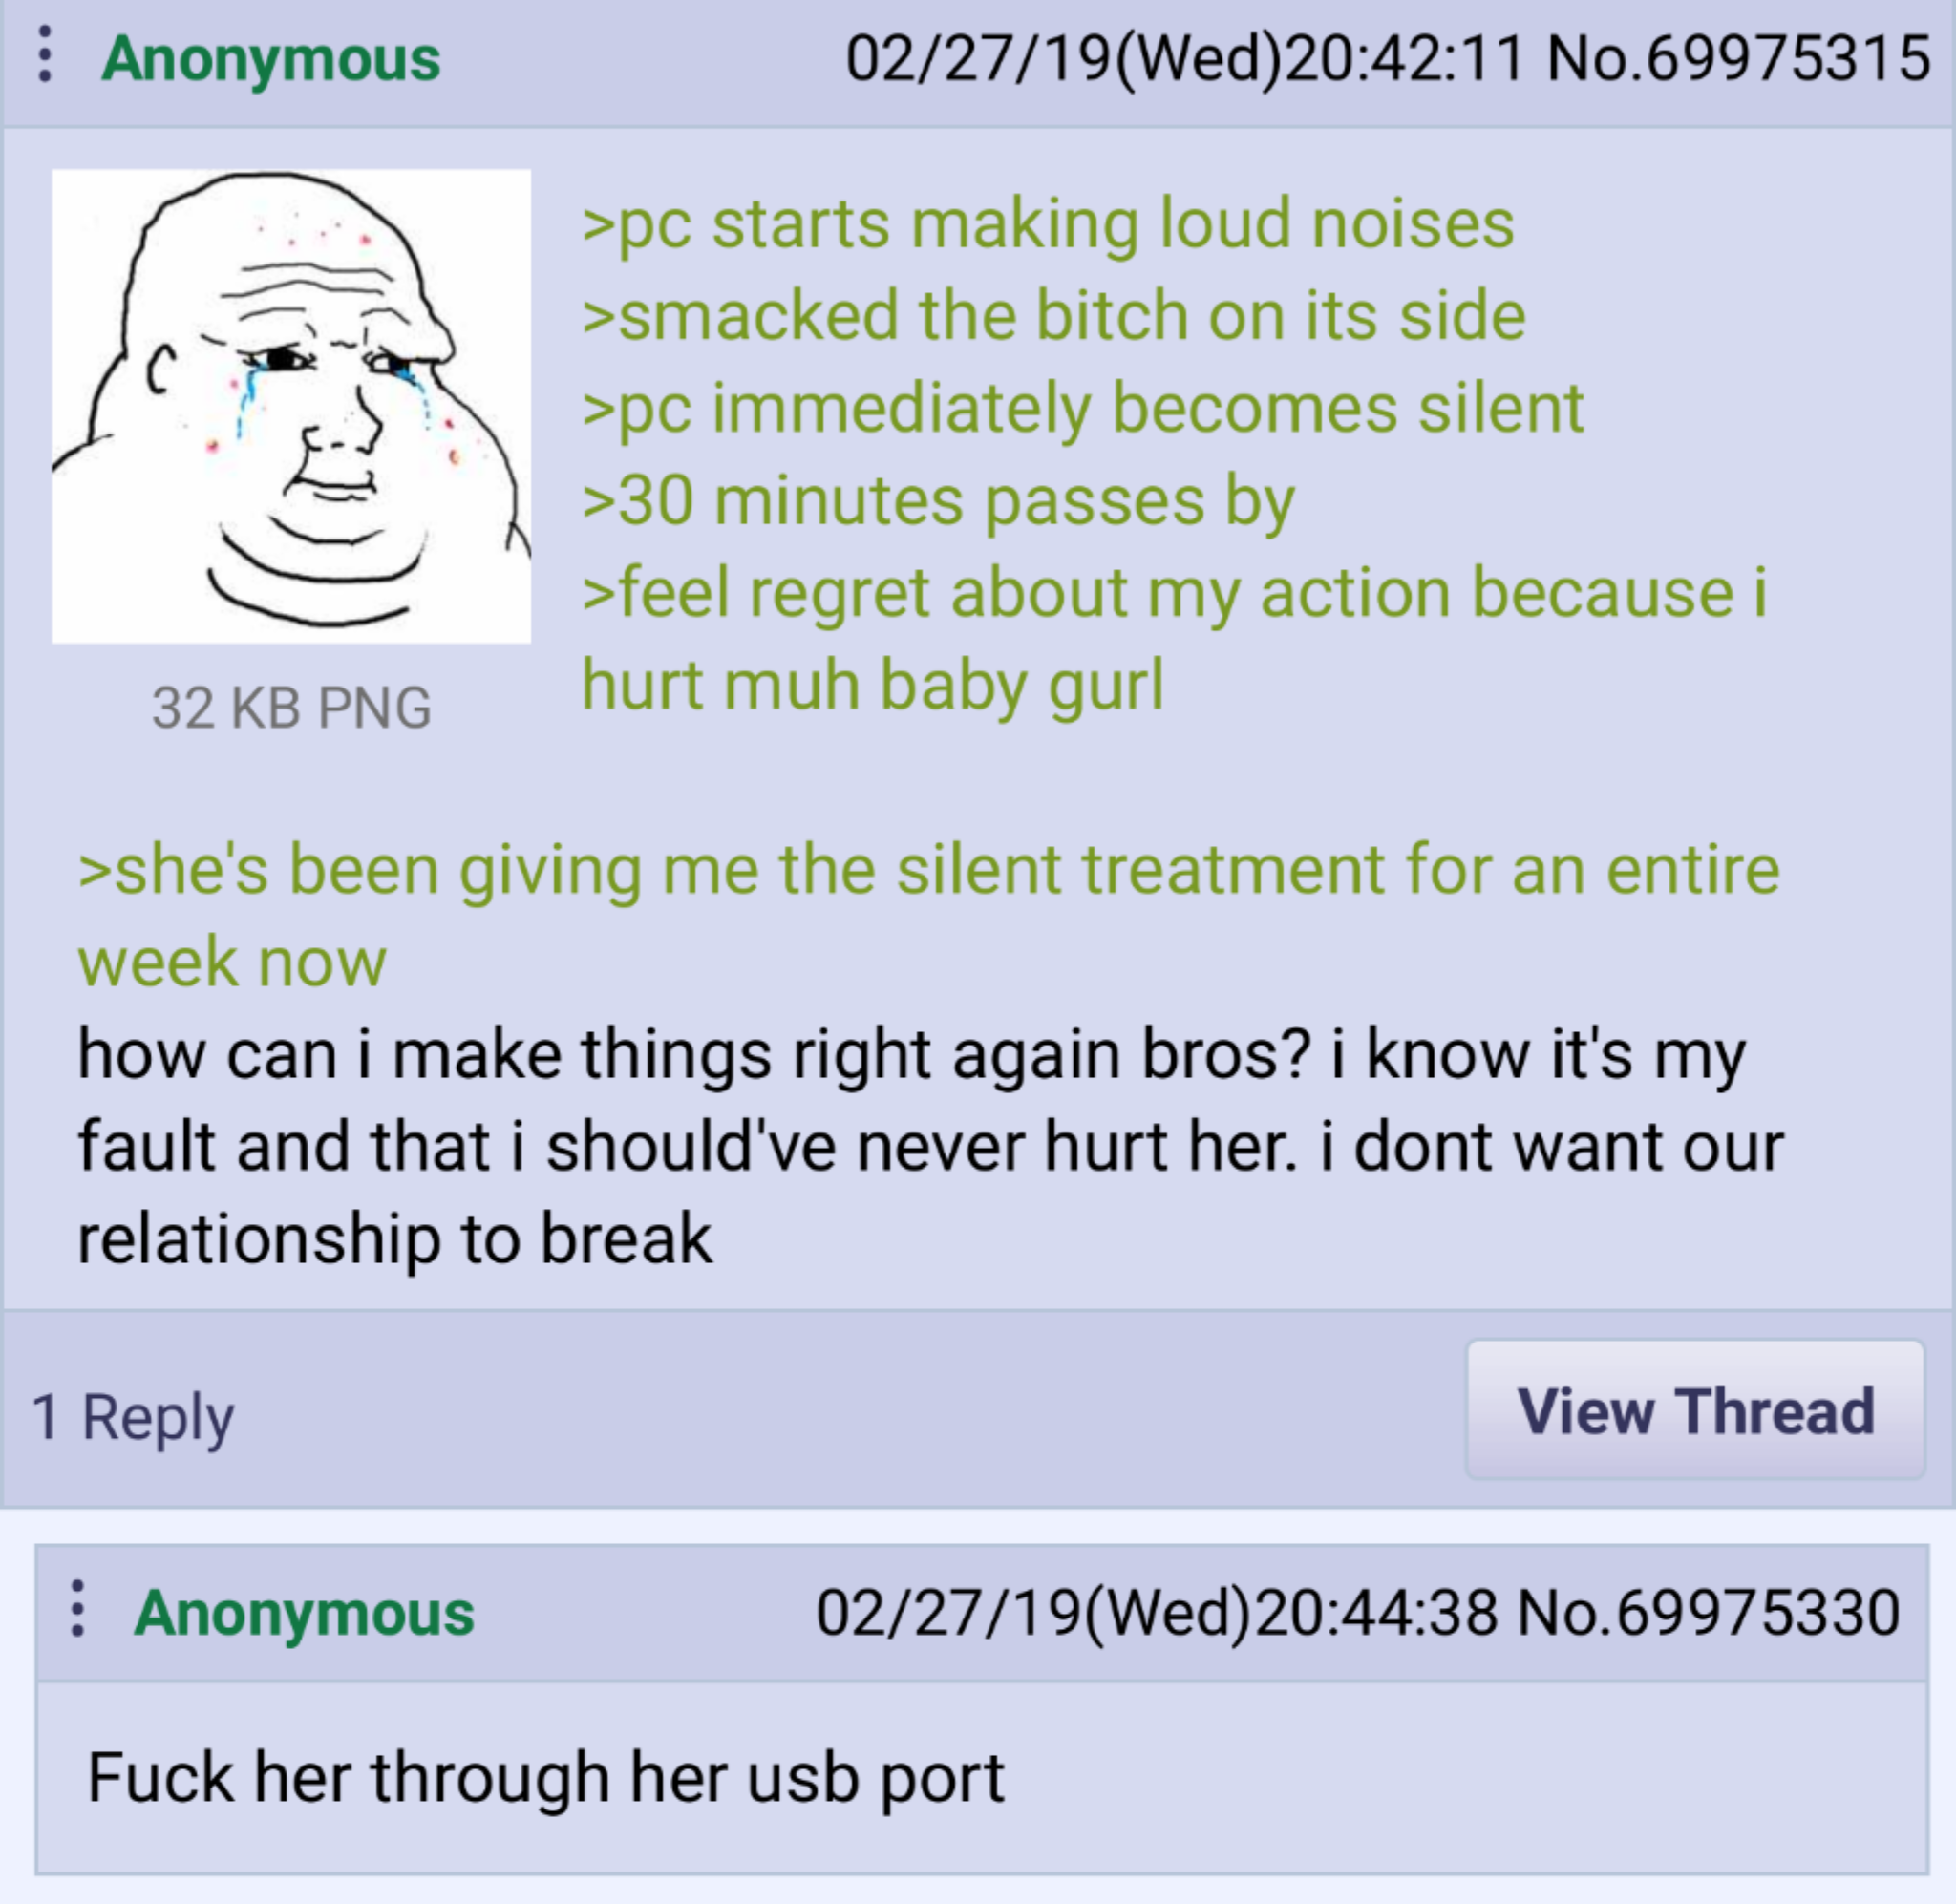 Anon and his PC